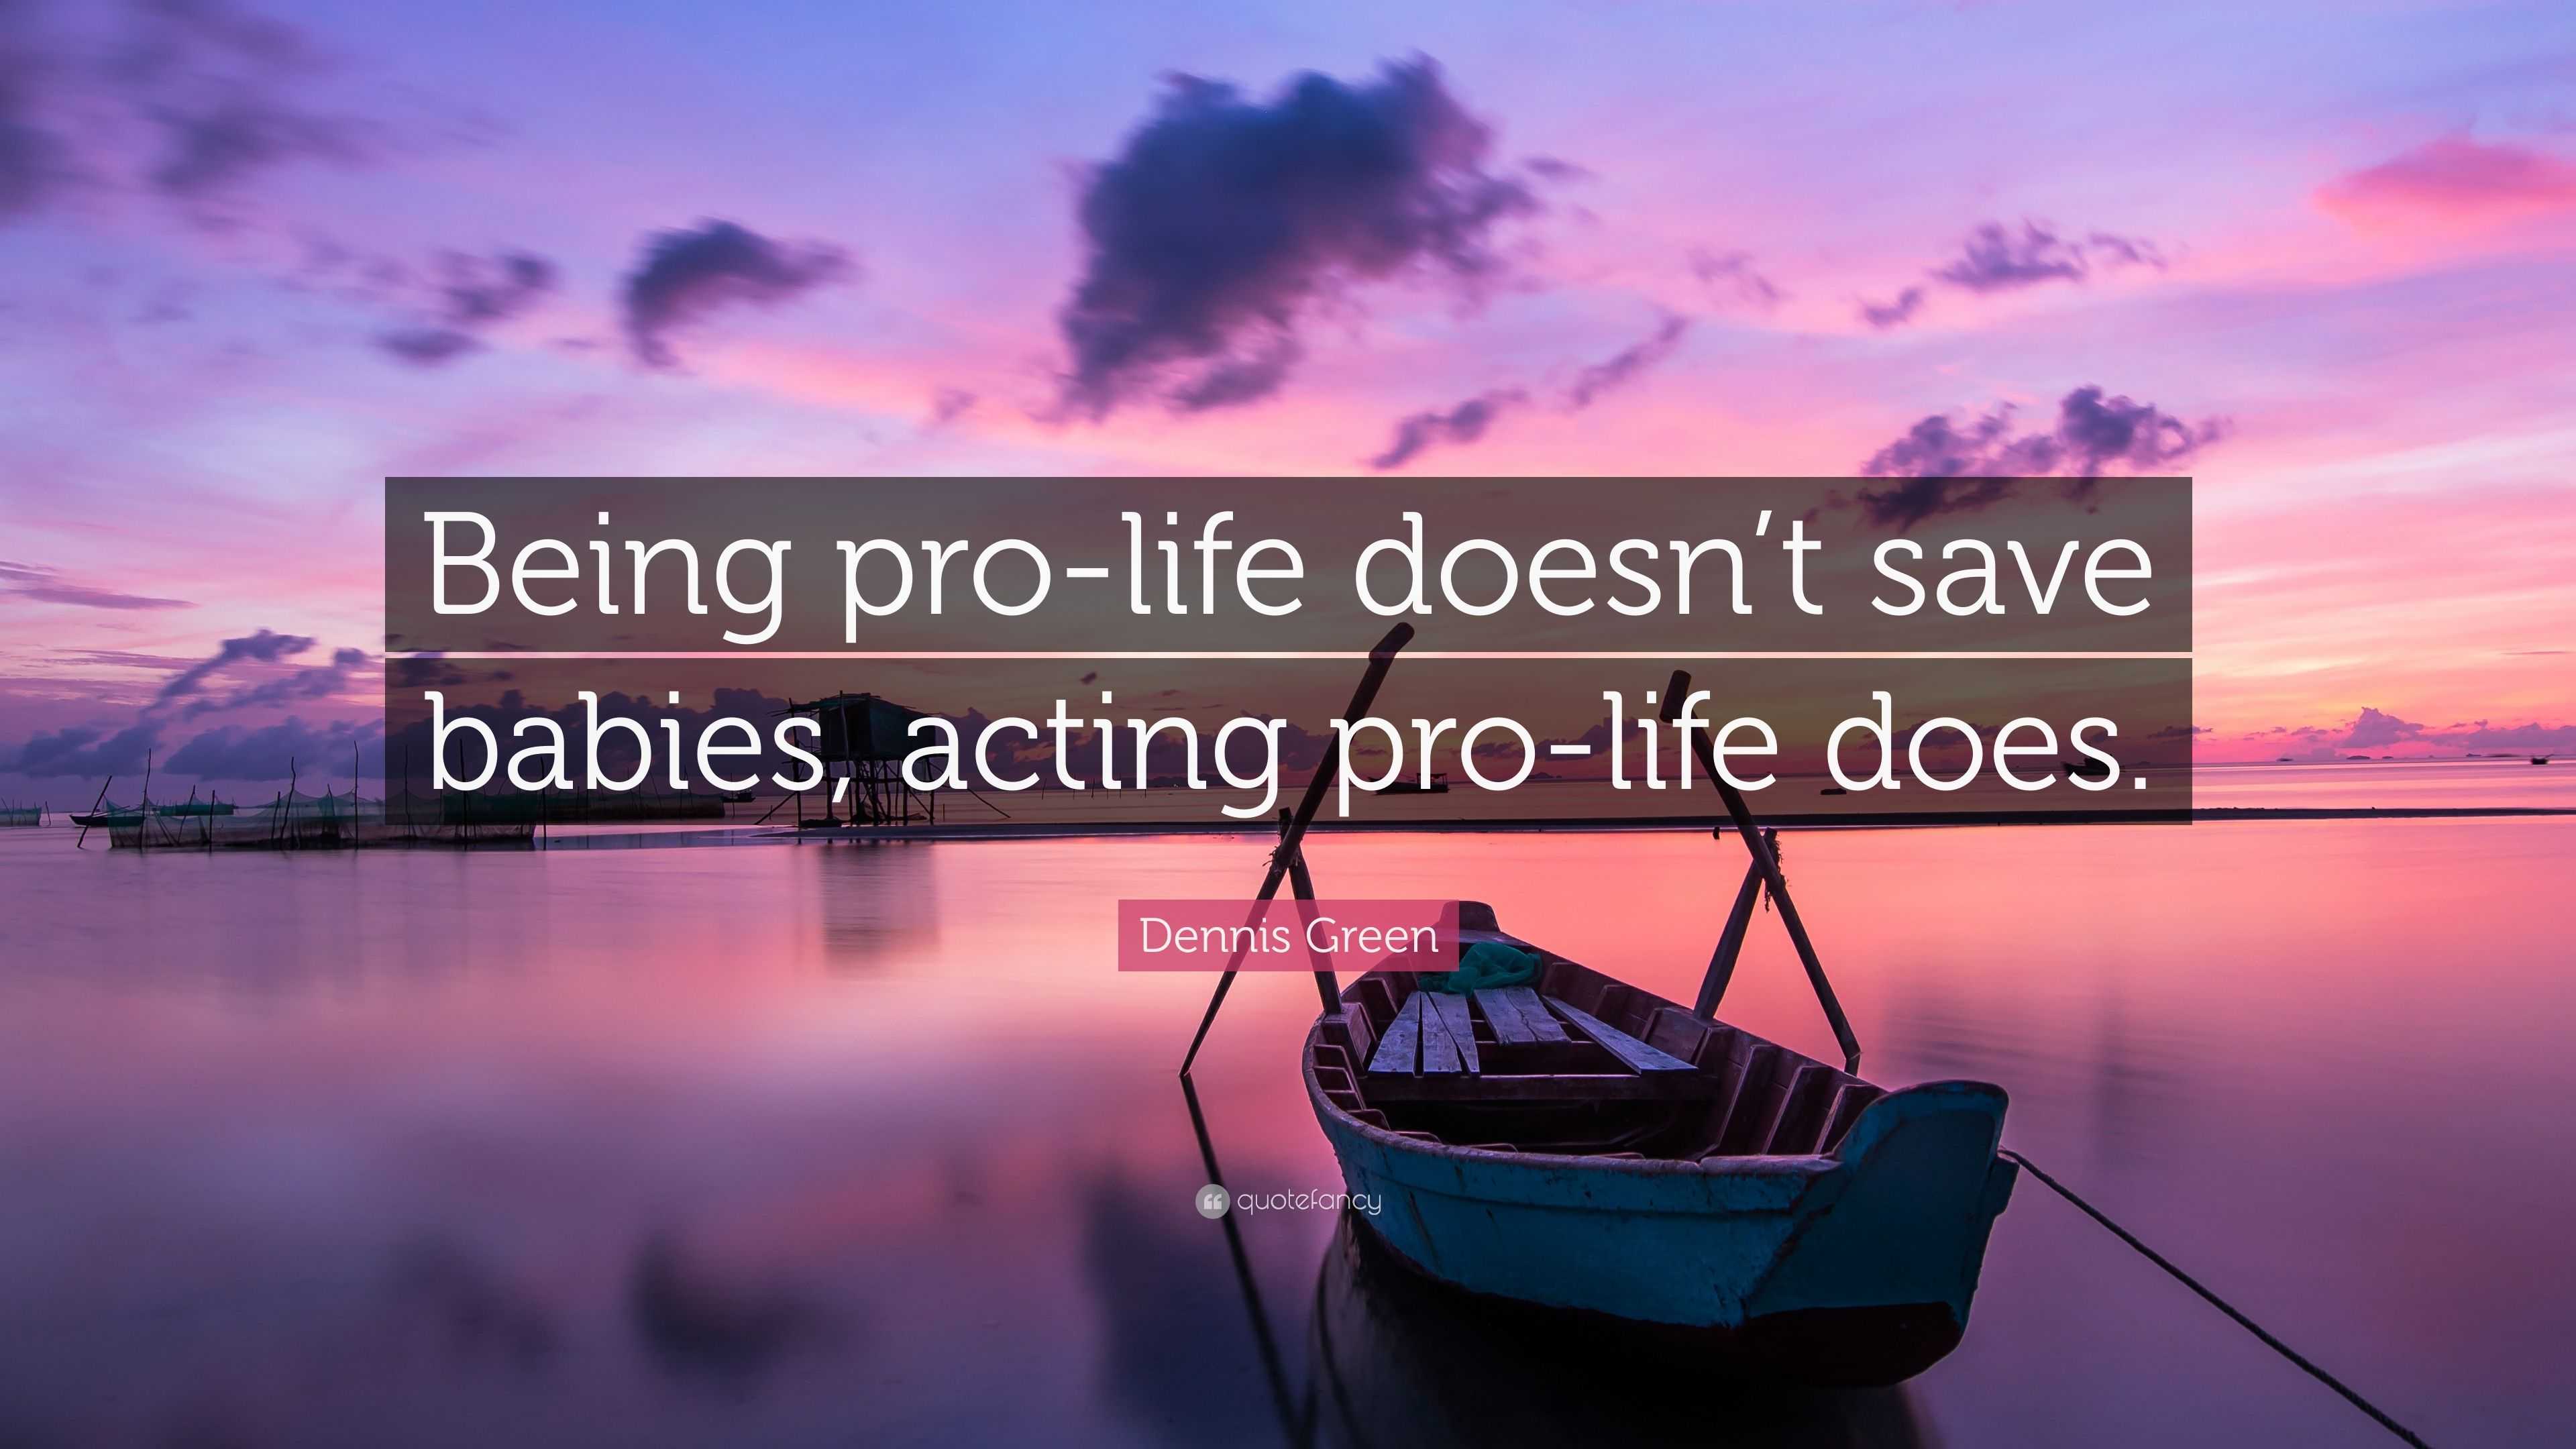 Dennis Green Quote: “Being pro-life doesn’t save babies, acting pro